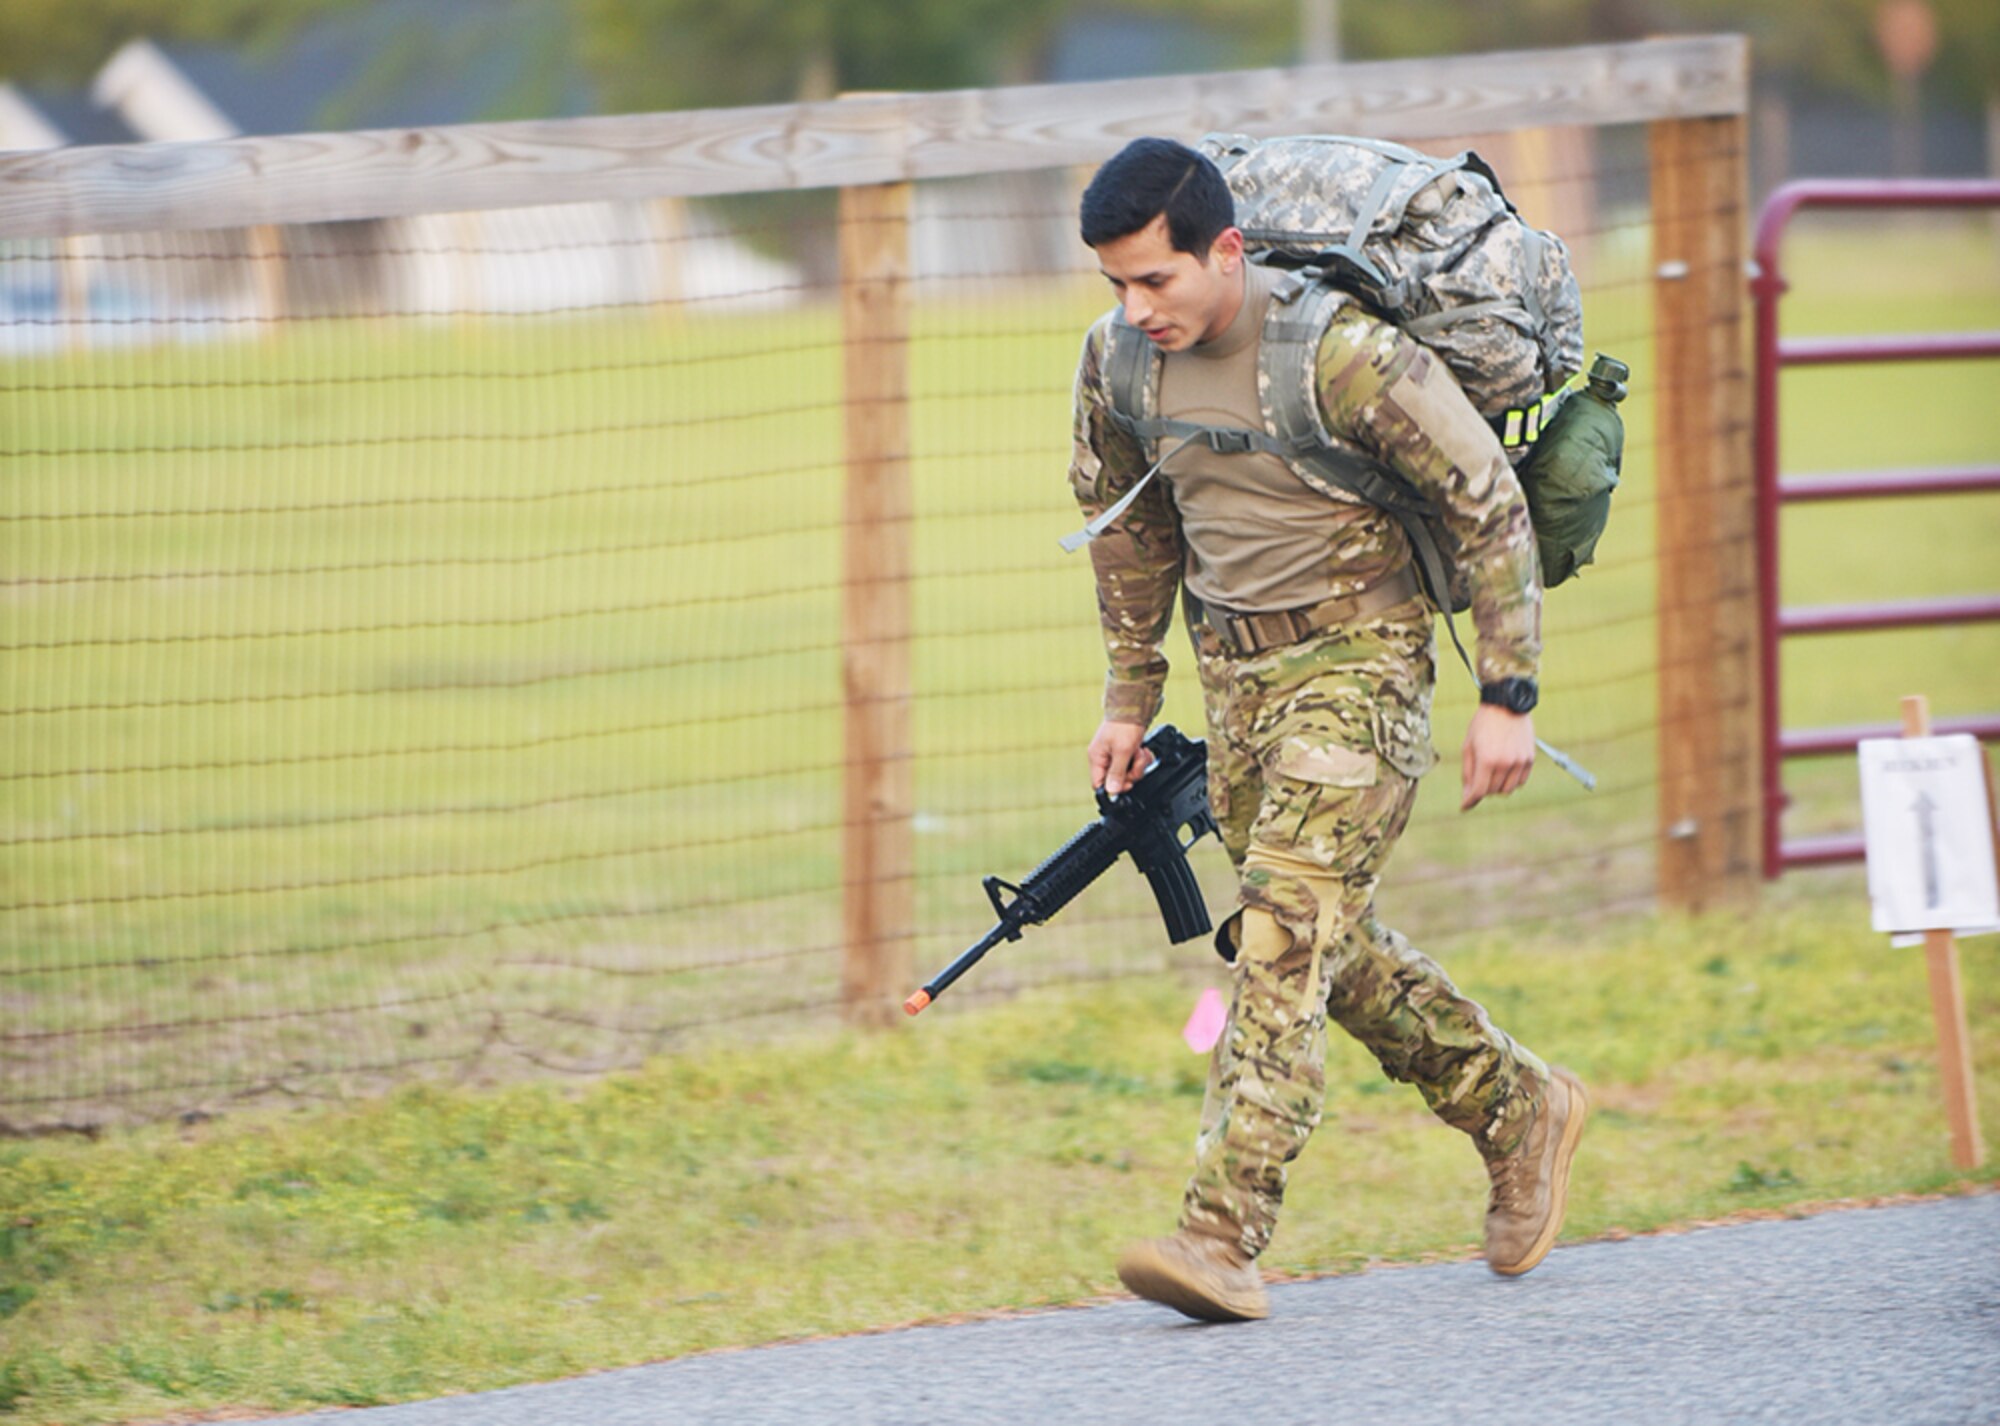 The Robins Air Force Base Fitness Center sponsored a 10-Mile Ruck Run on March 24, 2017. Today's ruck run was one of many military-centric events the Fitness Center offers. Participants wore ruck sacks weighing at least 35 pounds while trying to manage a 10-mile cross country course as fast as possible.  (U.S. Air Force photos/RAYMOND CRAYTON, JR.)
